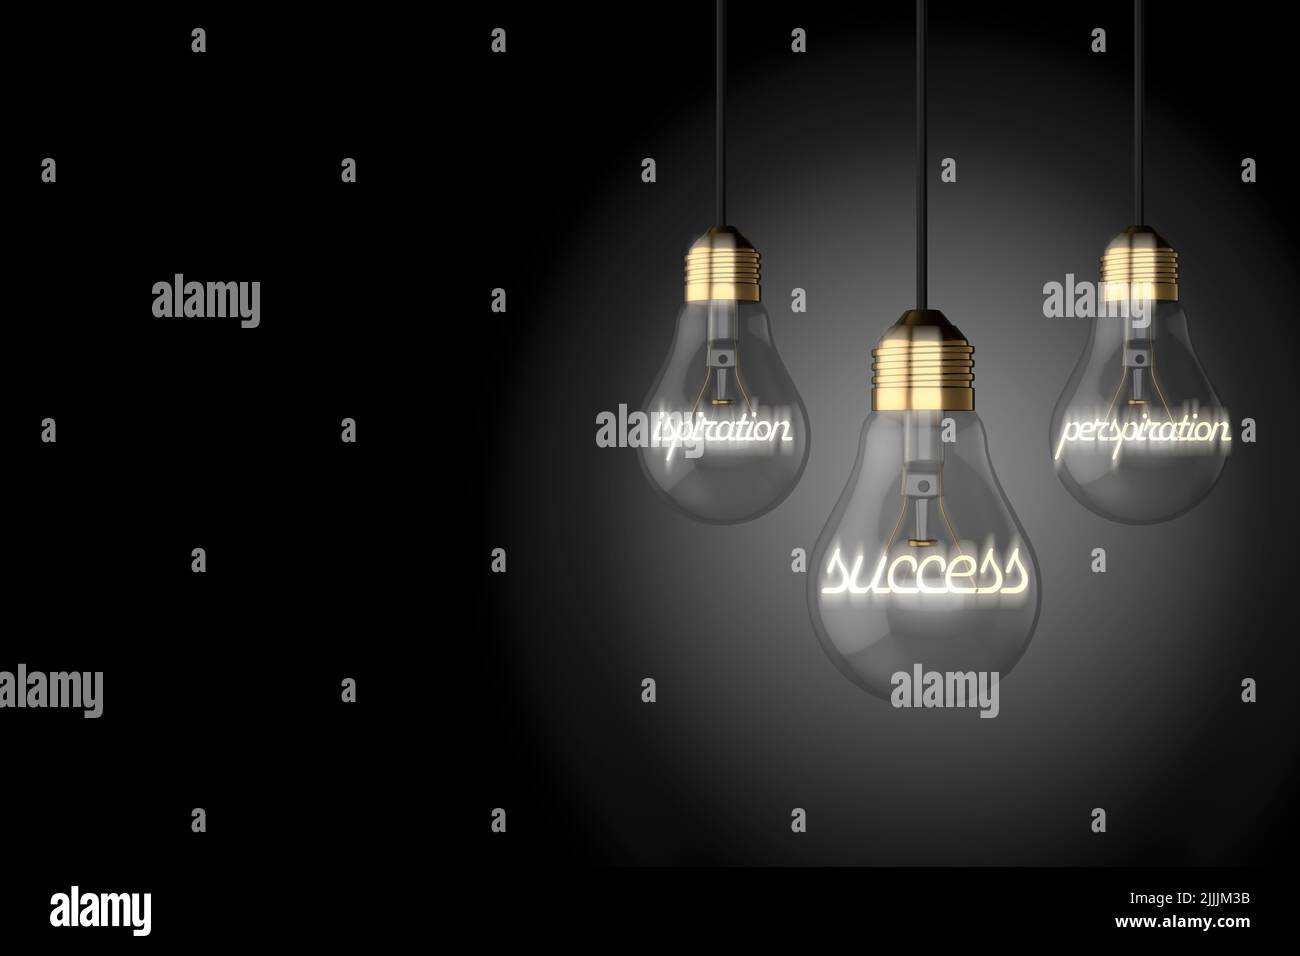 old style light bulbs lightbulbs illustrating inspiration perspiration success concept on a black background Stock Photo